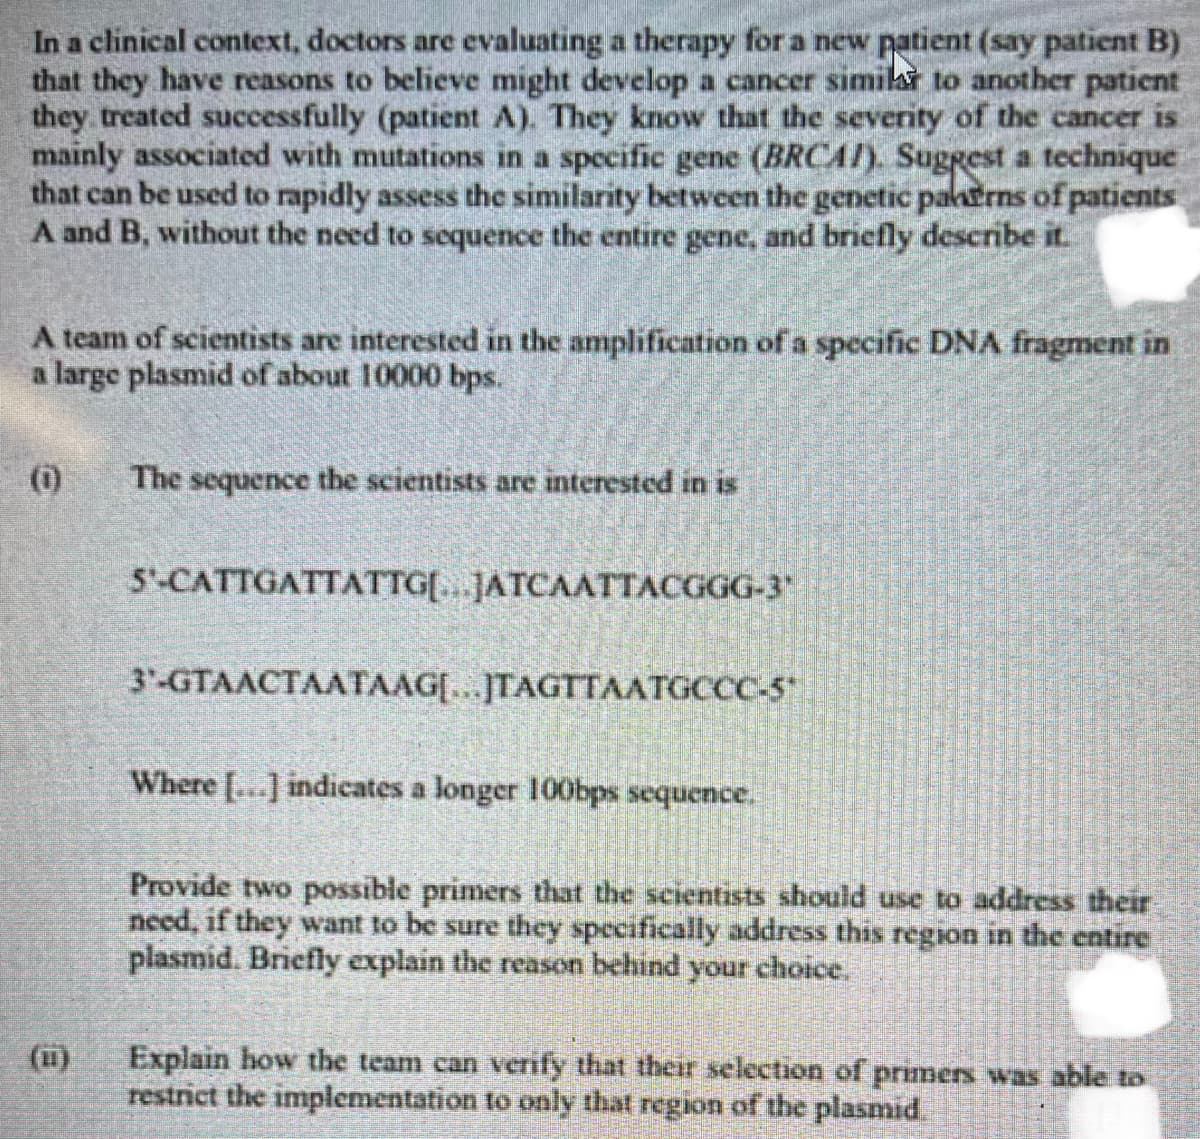 In a clinical context, doctors are evaluating a therapy for a new patient (say patient B)
that they have reasons to believe might develop a cancer similar to another patient
they treated successfully (patient A). They know that the severity of the cancer is
mainly associated with mutations in a specific gene (BRCAI). Suggest a technique
that can be used to rapidly assess the similarity between the genetic panerns of patients
A and B, without the need to sequence the entire gene, and briefly describe it.
A team of scientists are interested in the amplification of a specific DNA fragment in
a large plasmid of about 10000 bps.
(0)
(11)
The sequence the scientists are interested in is
5'-CATTGATTATTG[...JATCAATTACGGG-3"
3-GTAACTAATAAG[...]TAGTTAATGCCC-5*
Where [...] indicates a longer 100bps sequence.
Provide two possible primers that the scientists should use to address their
need, if they want to be sure they specifically address this region in the entire
plasmid. Briefly explain the reason behind your choice.
Explain how the team can verify that their selection of primers was able to
restrict the implementation to only that region of the plasmid.